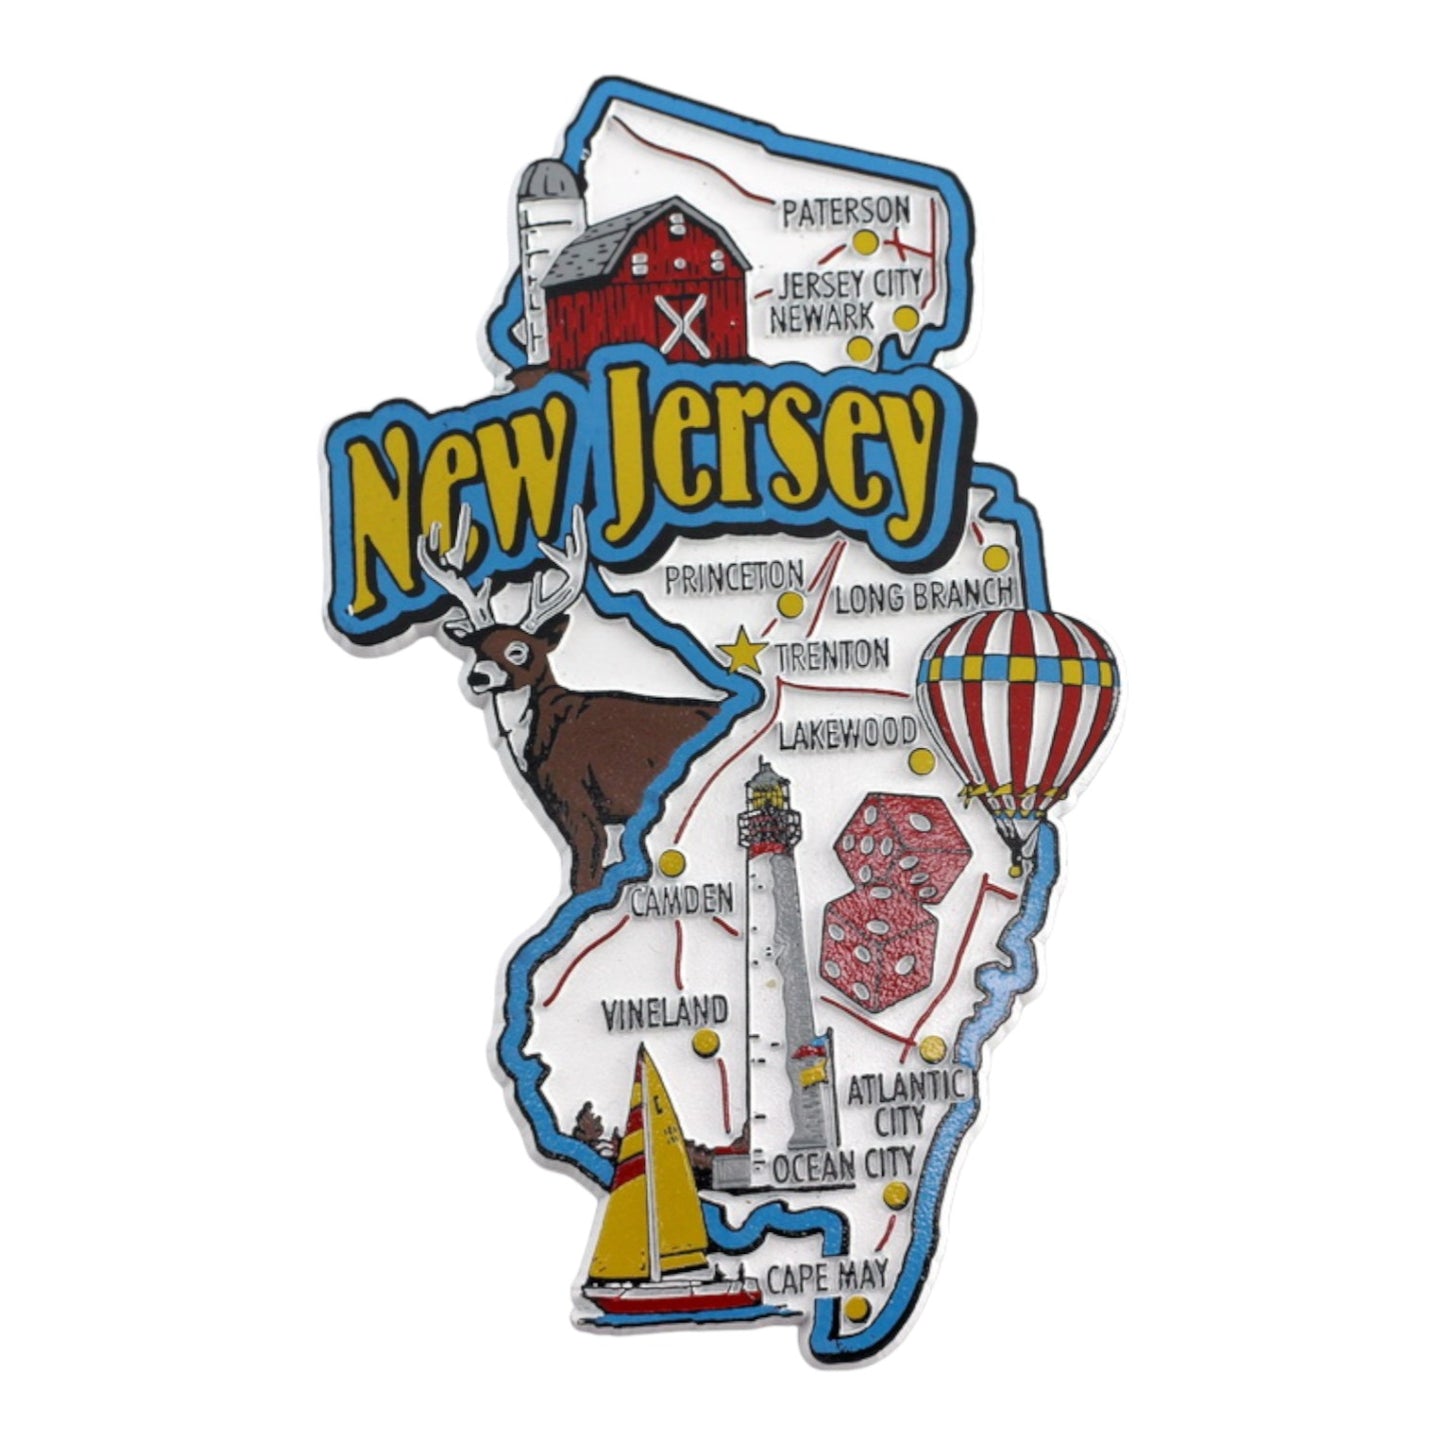 New Jersey State Map and Landmarks Collage Fridge Souvenir Collectible Magnet